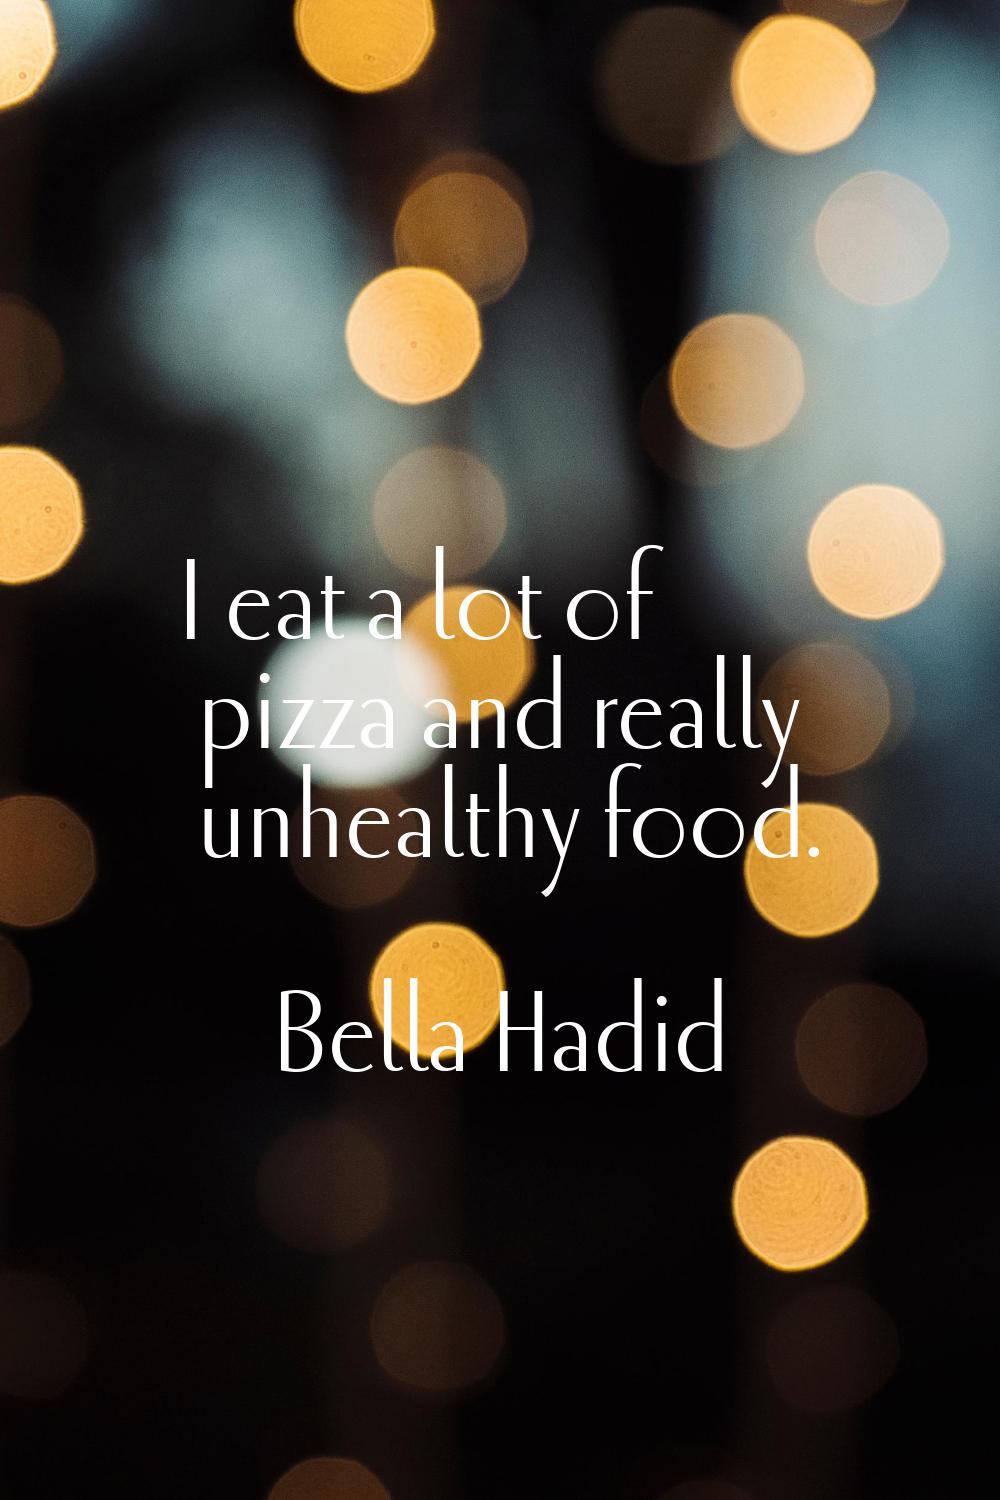 I eat a lot of pizza and really unhealthy food.